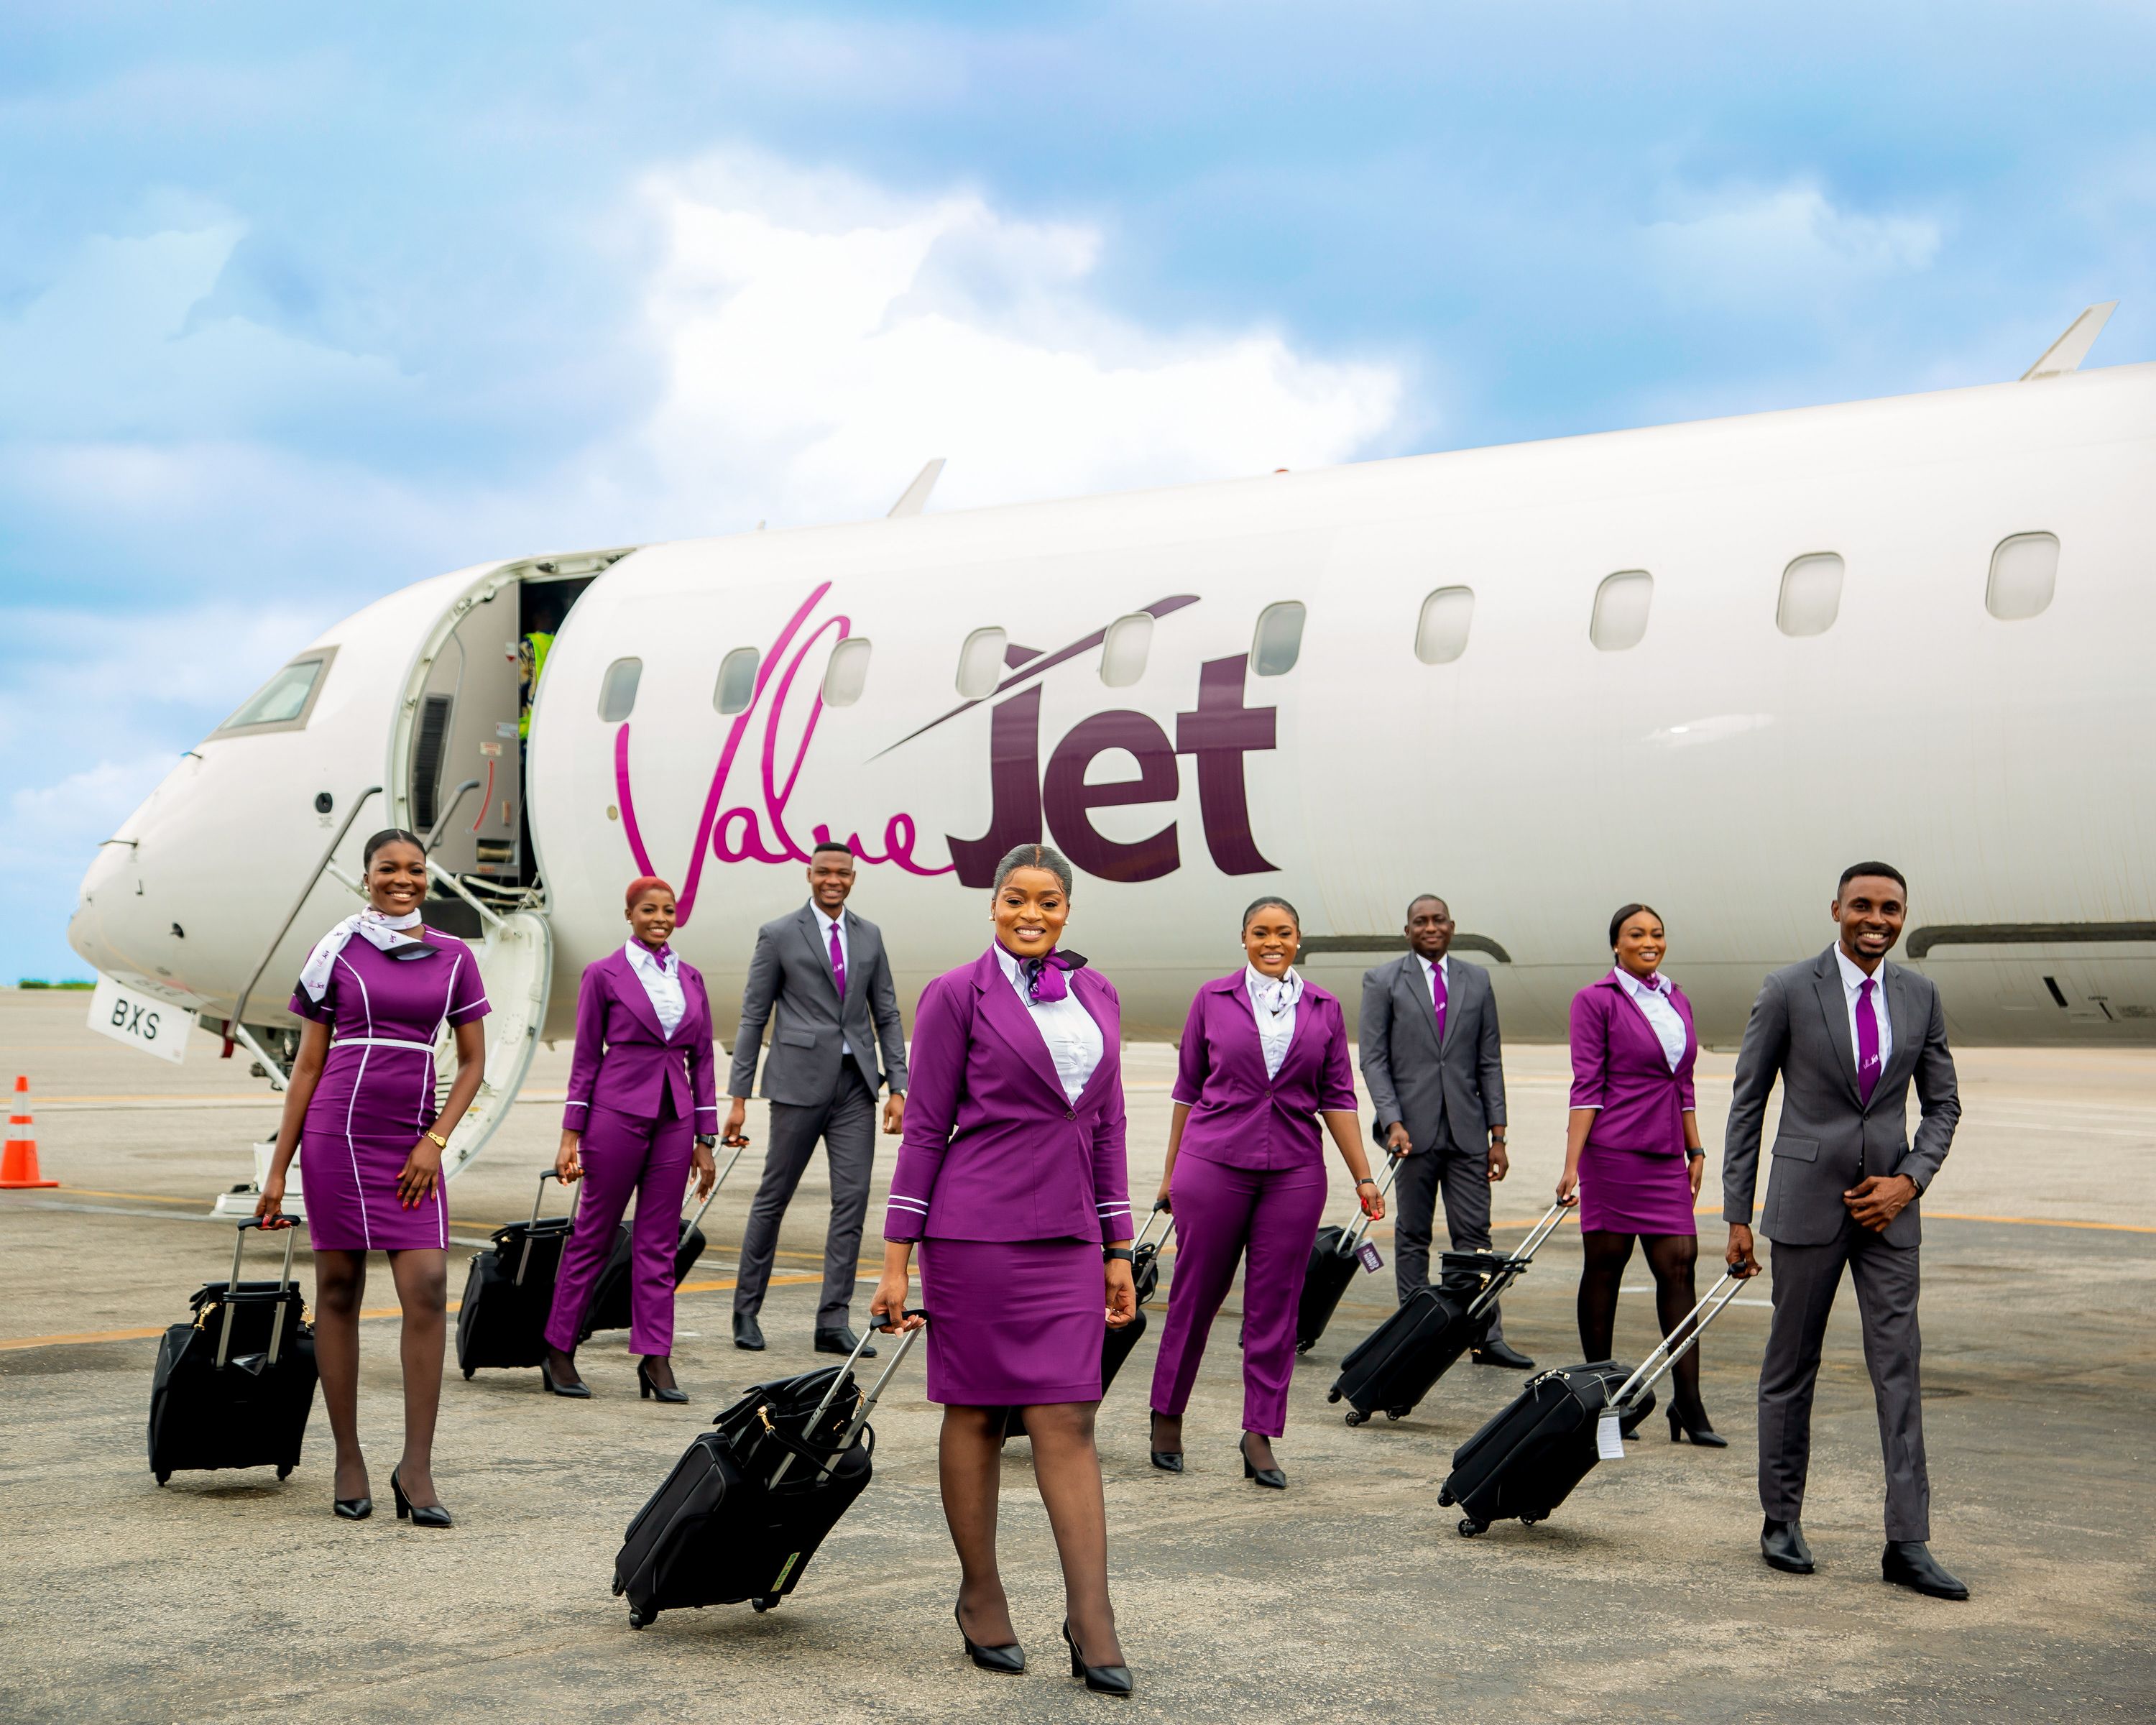 ValueJet aircraft and crew